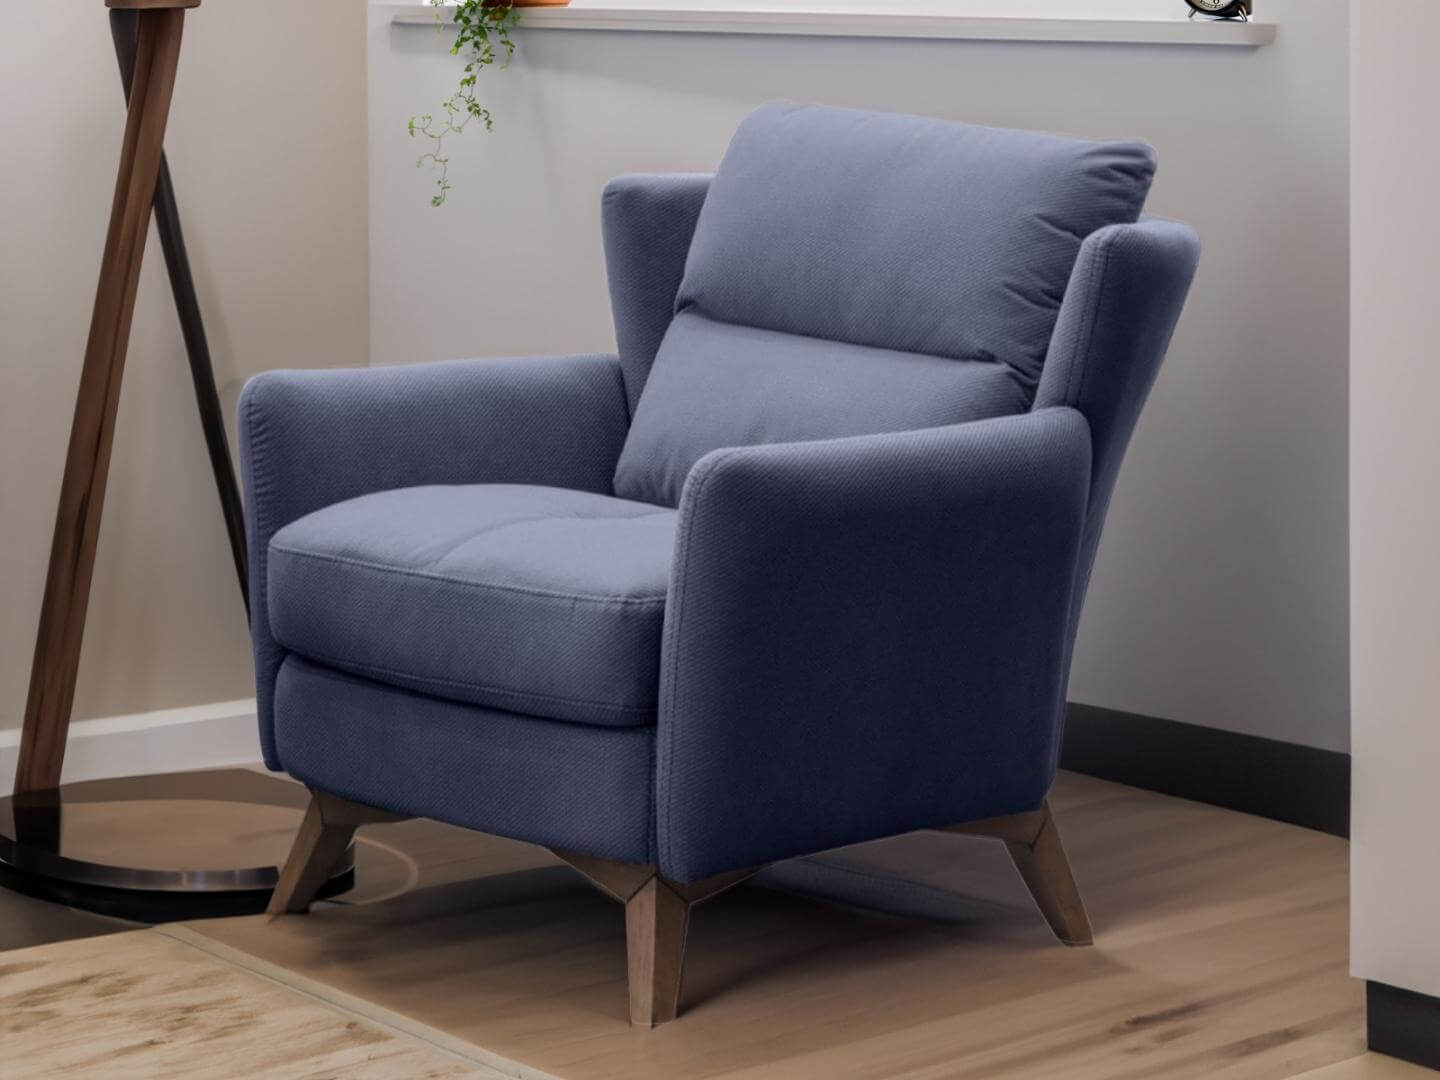 variant armchair blue - Lux Furniture